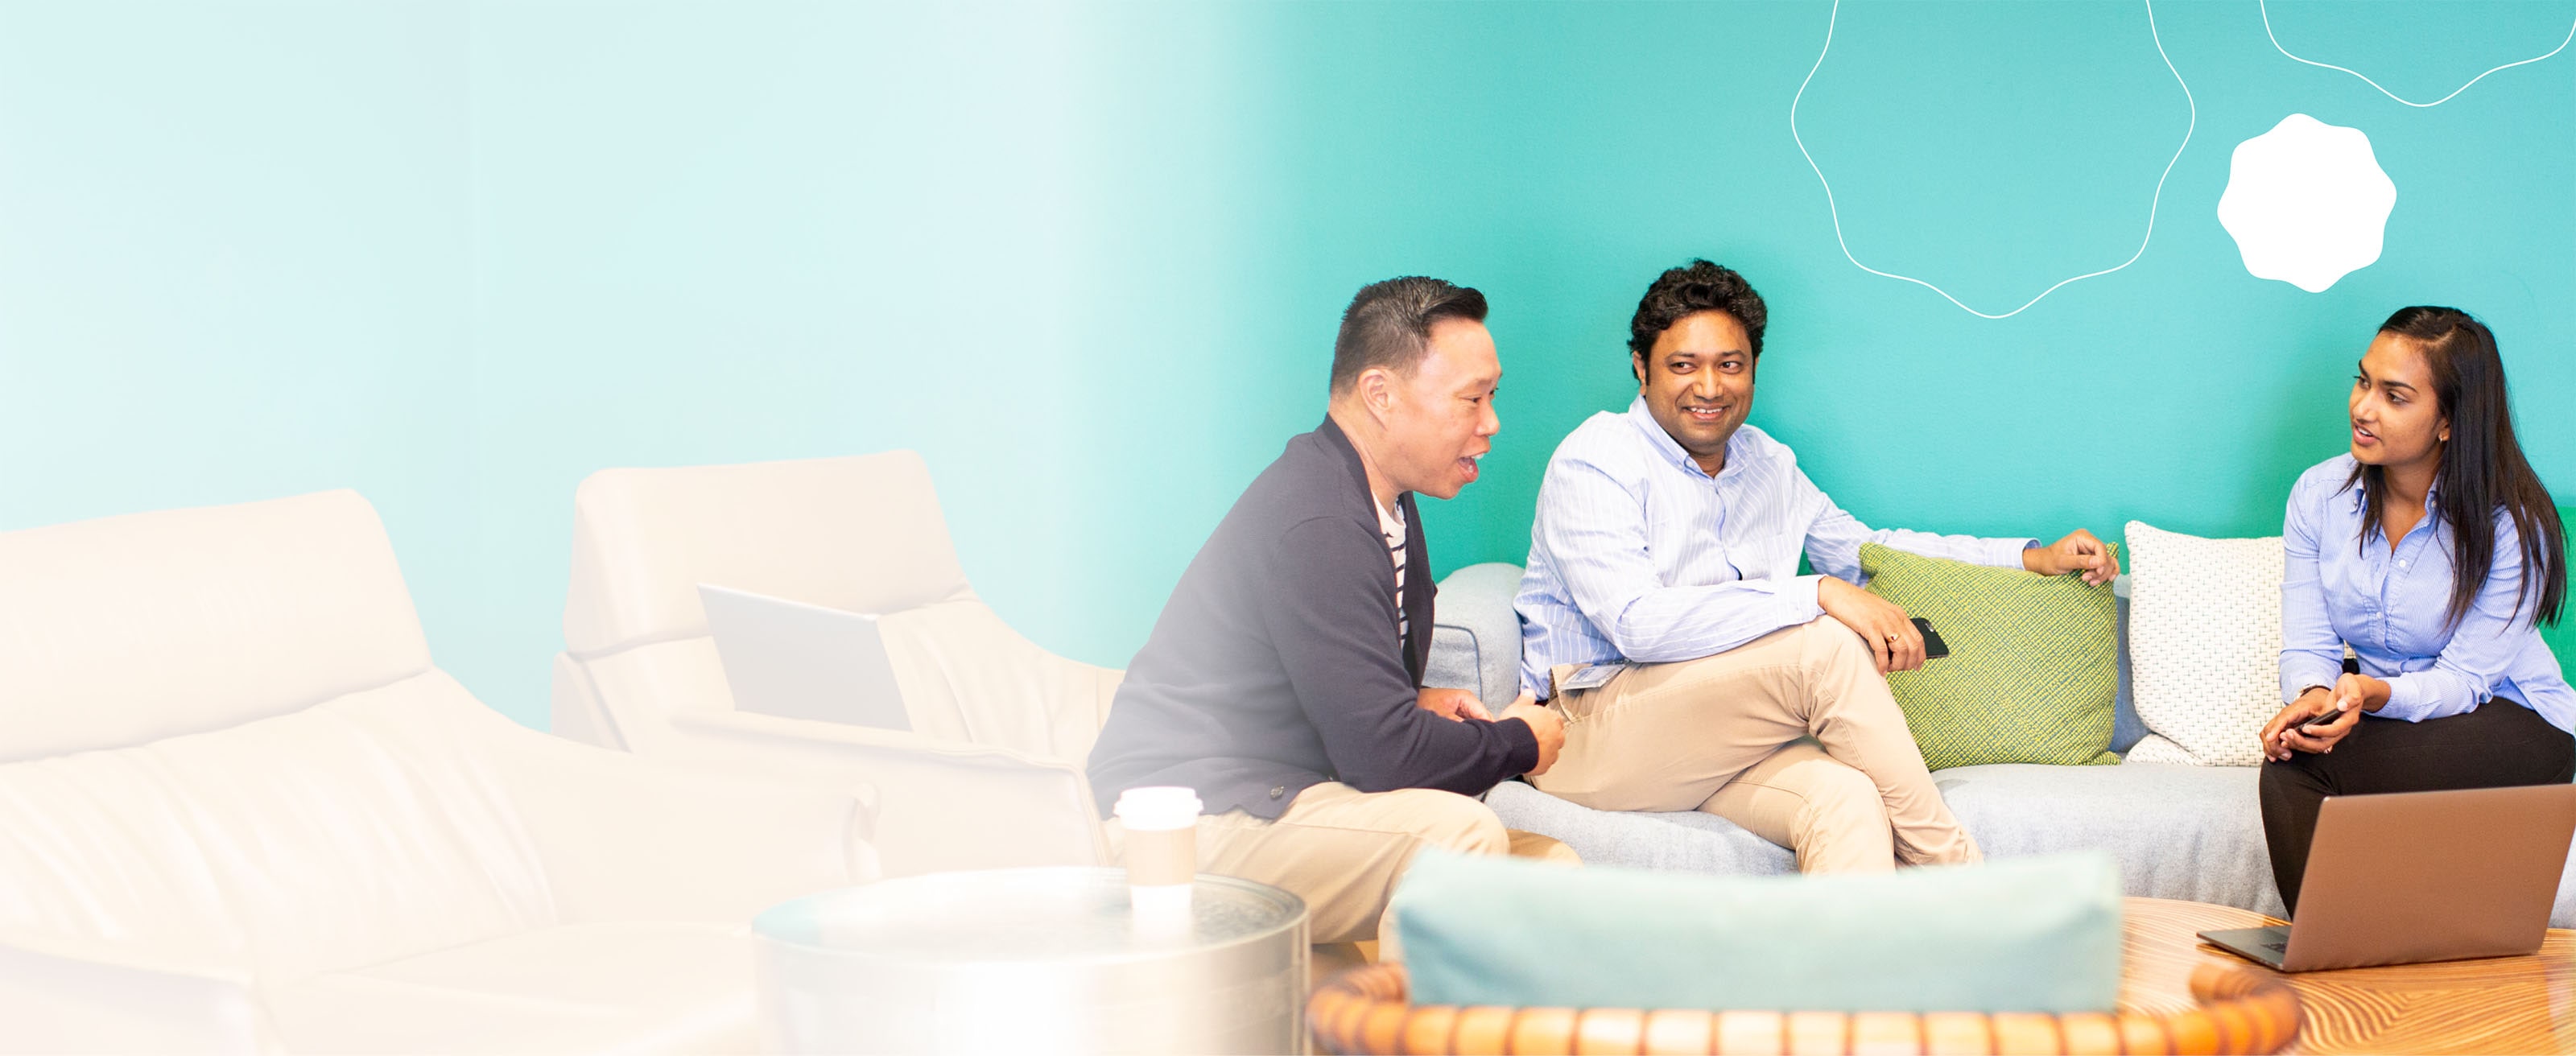 Cisco Learning Partners deliver authorized training to support core Cisco technologies and career certifications worldwide.